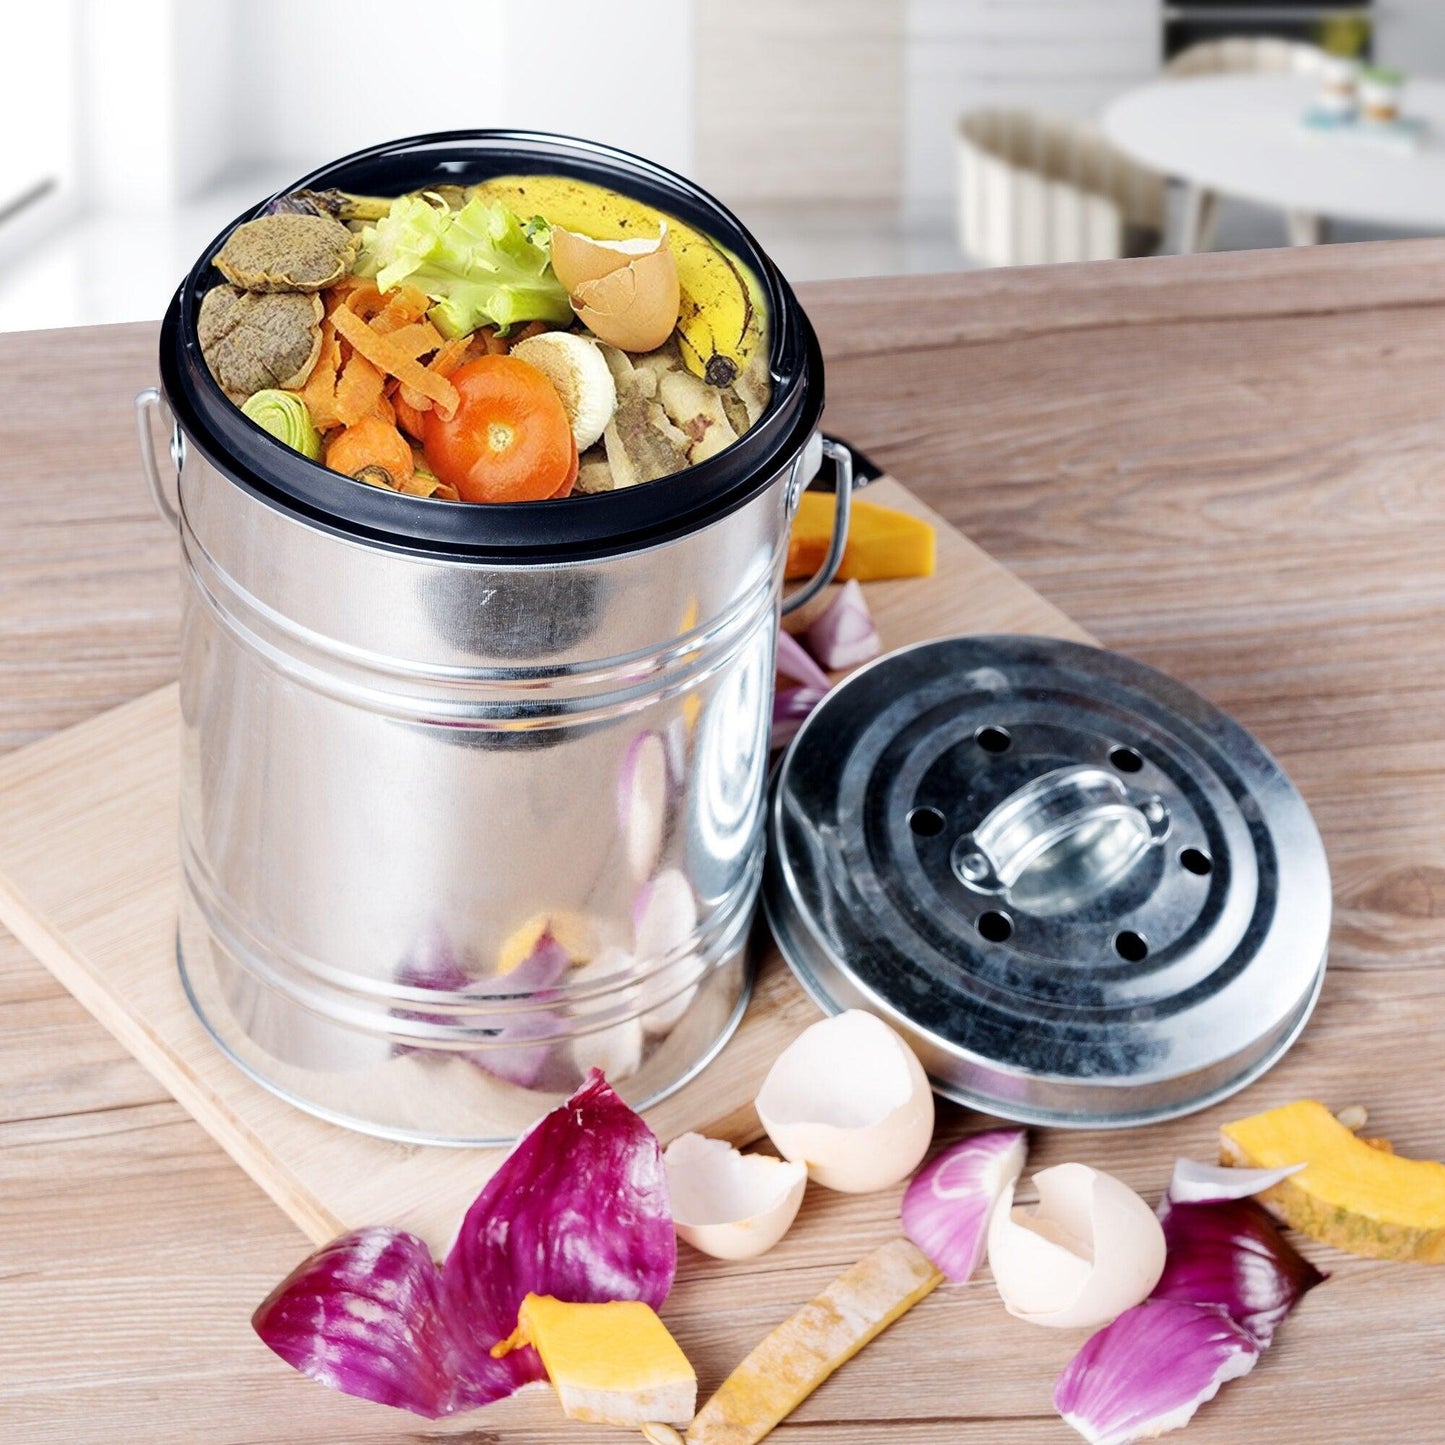 Stainless Steel Kitchen Compost Bin 3L – Earth Thanks